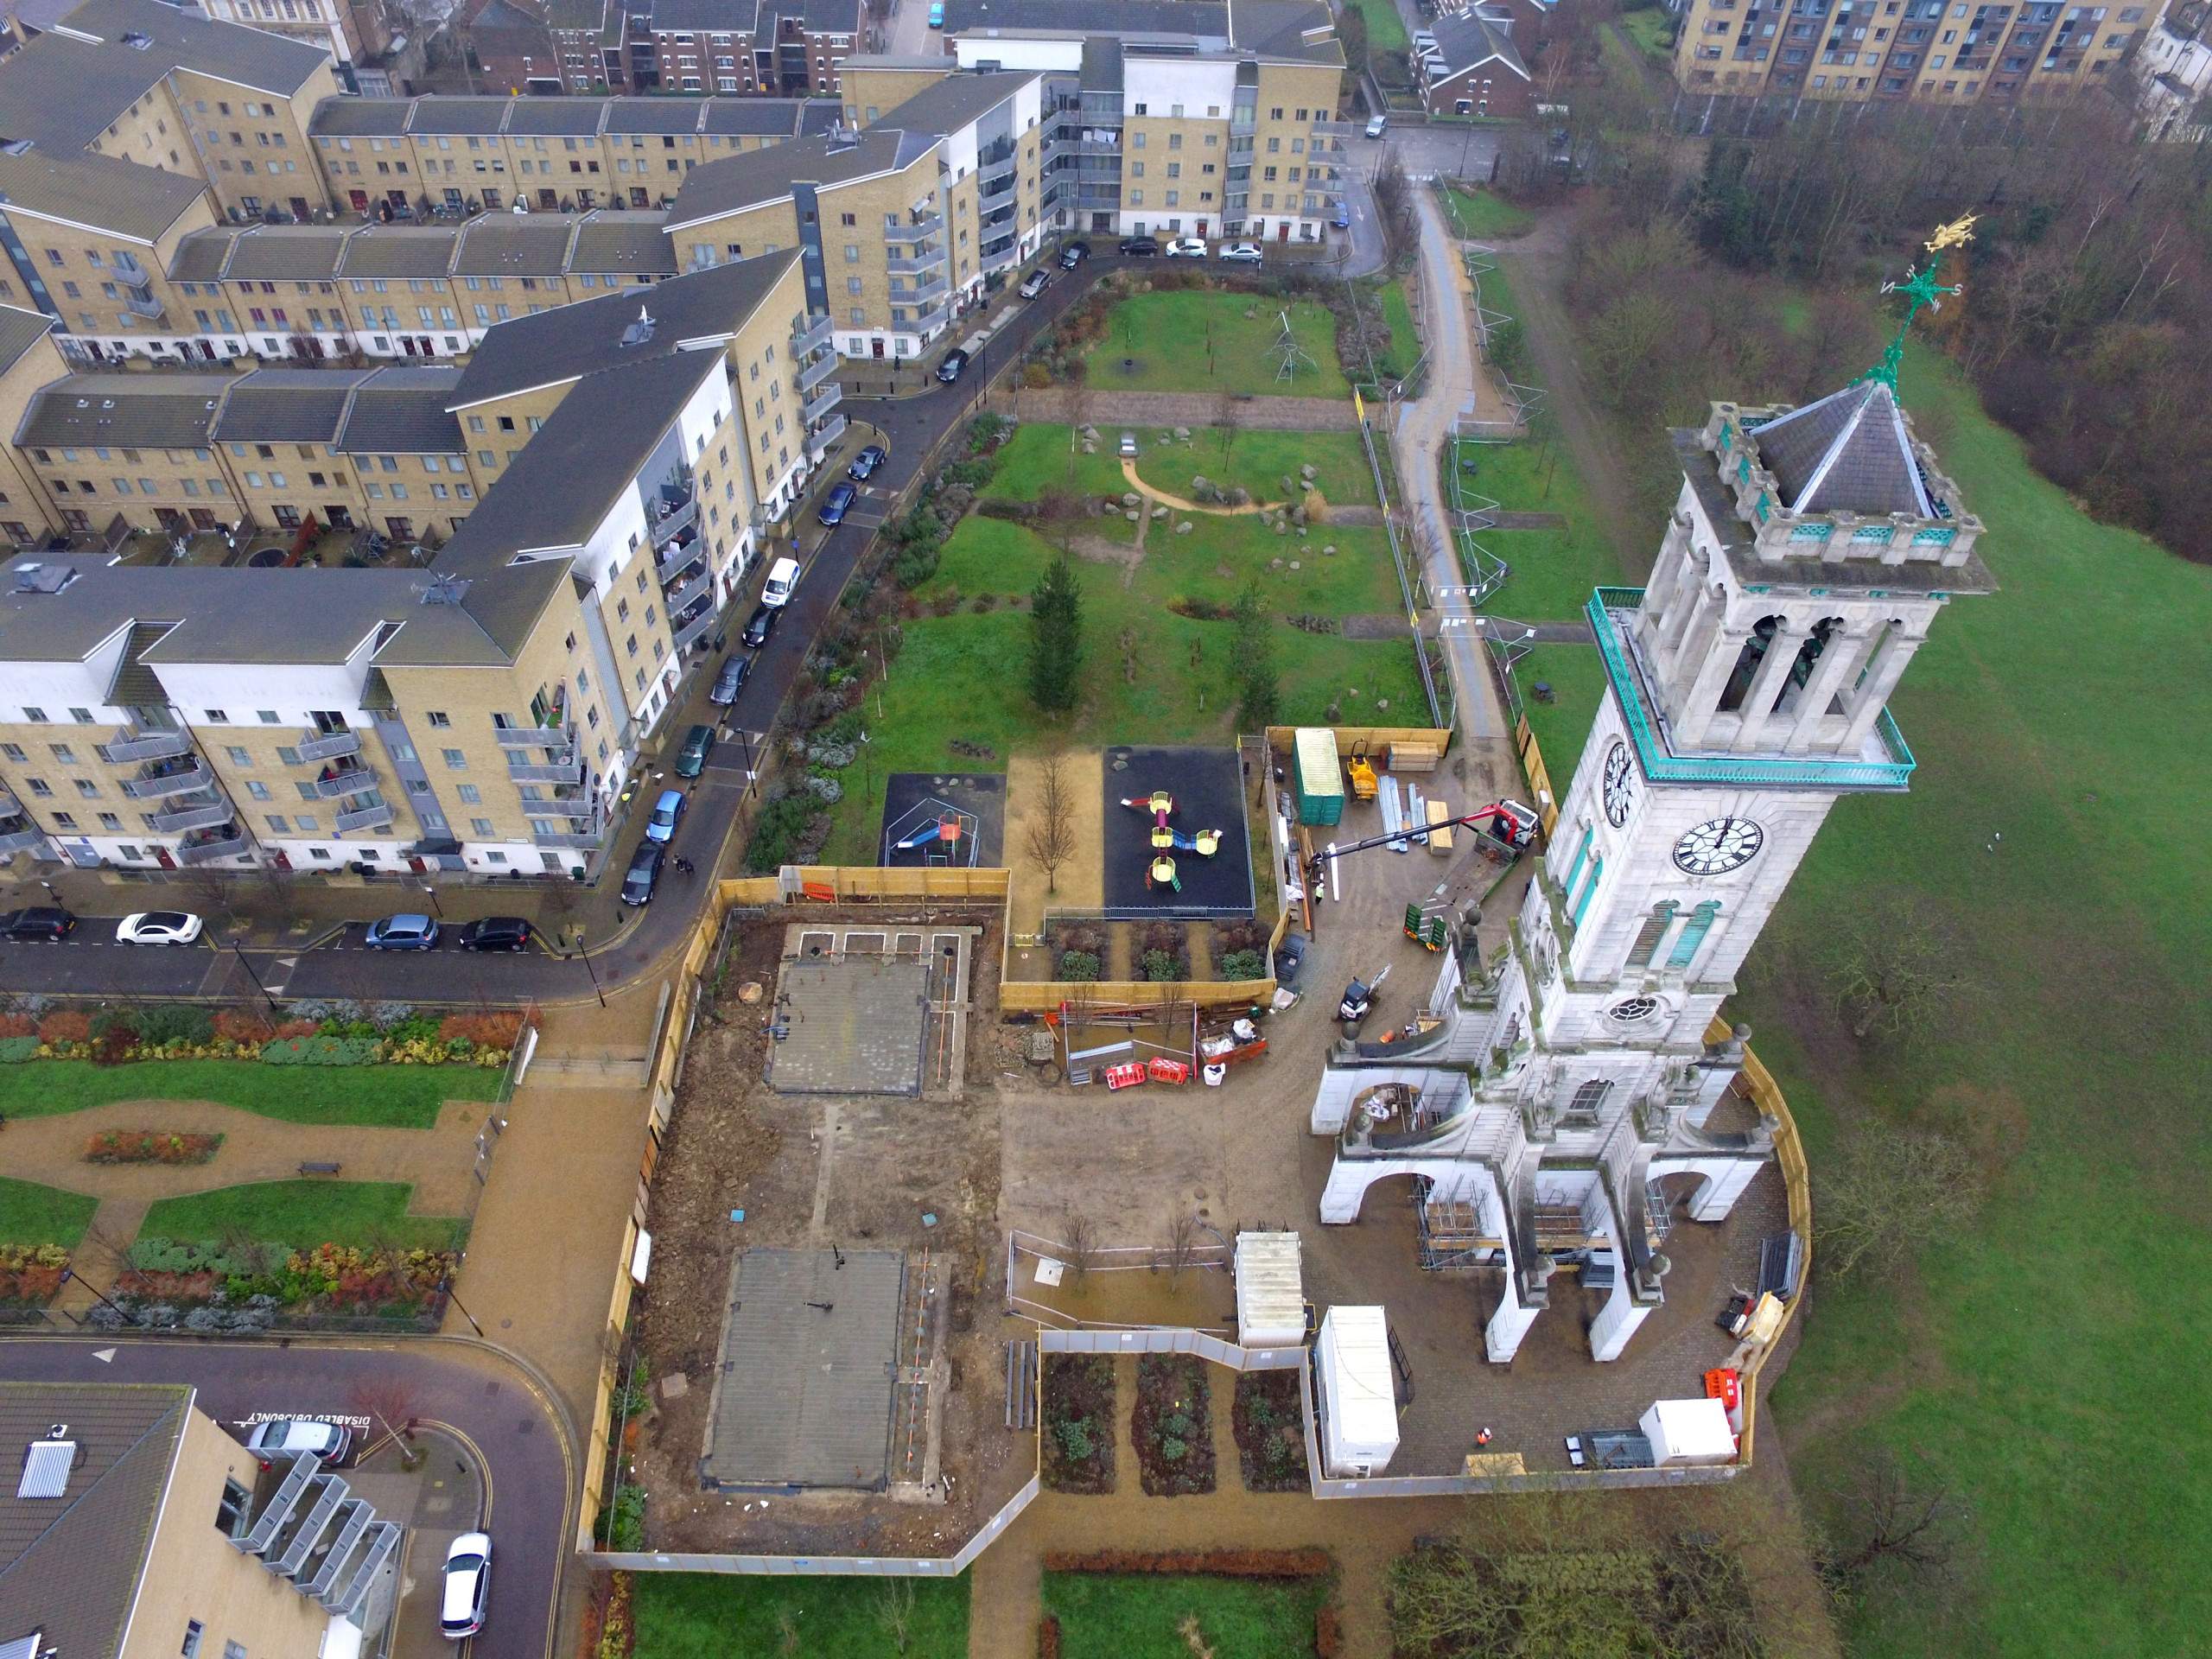 Aerial view of Caledonian clock tower in London with beam and block floor